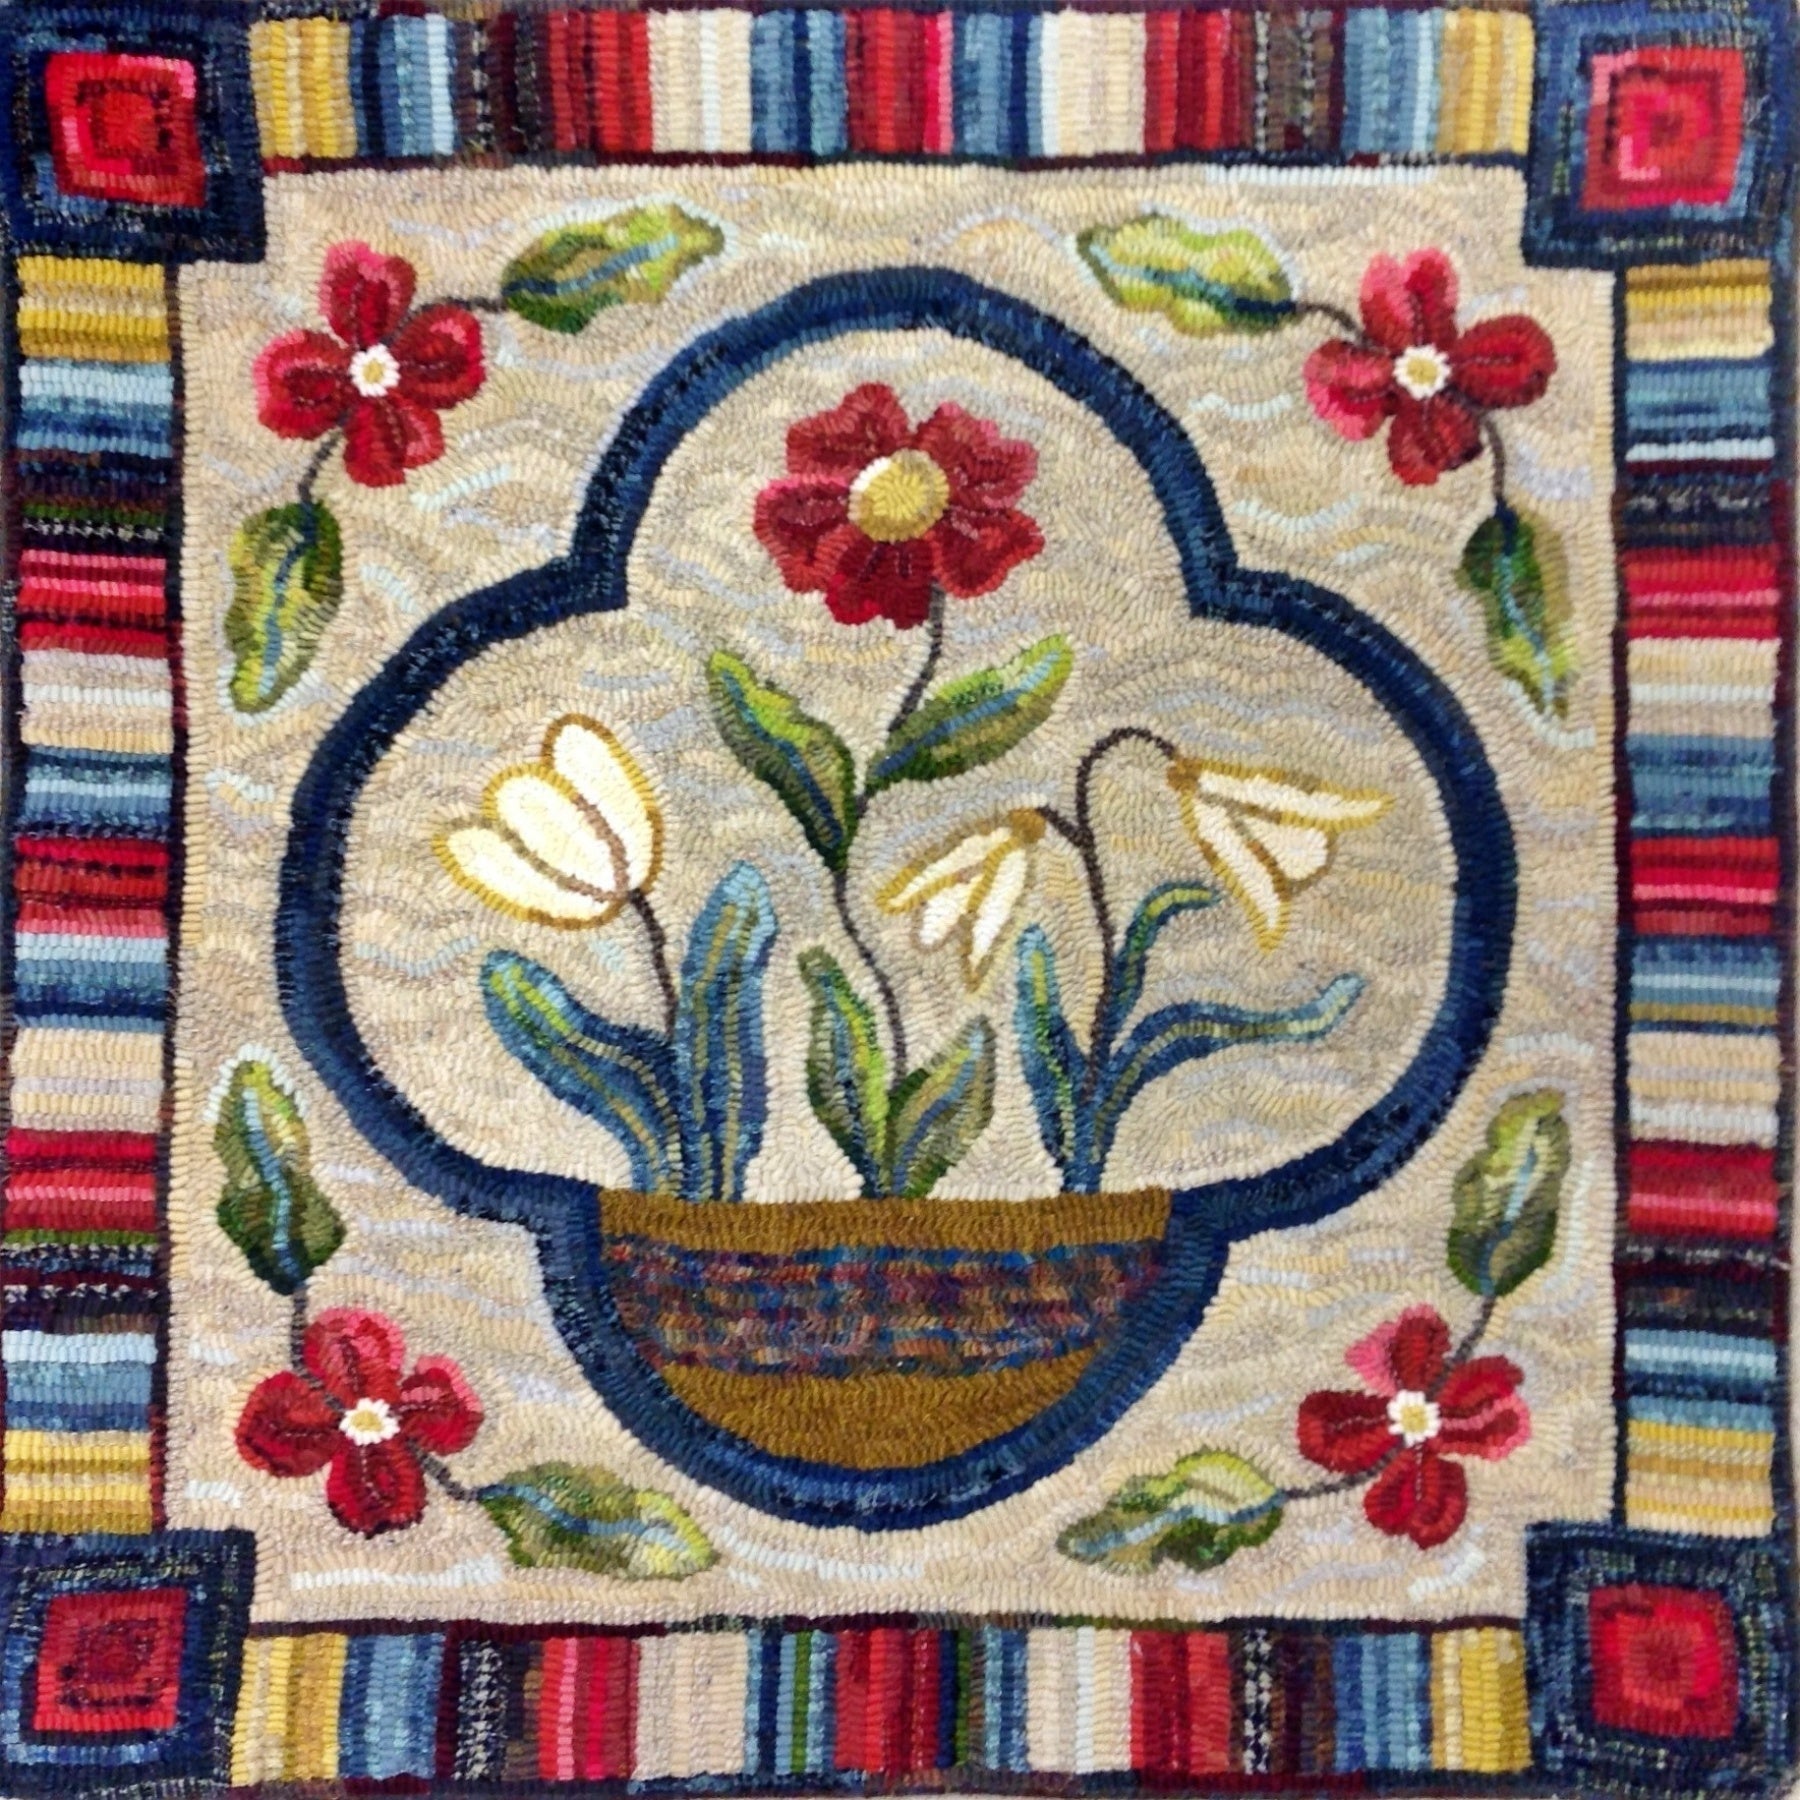 Floral Window, rug hooked by Kathie Meyers